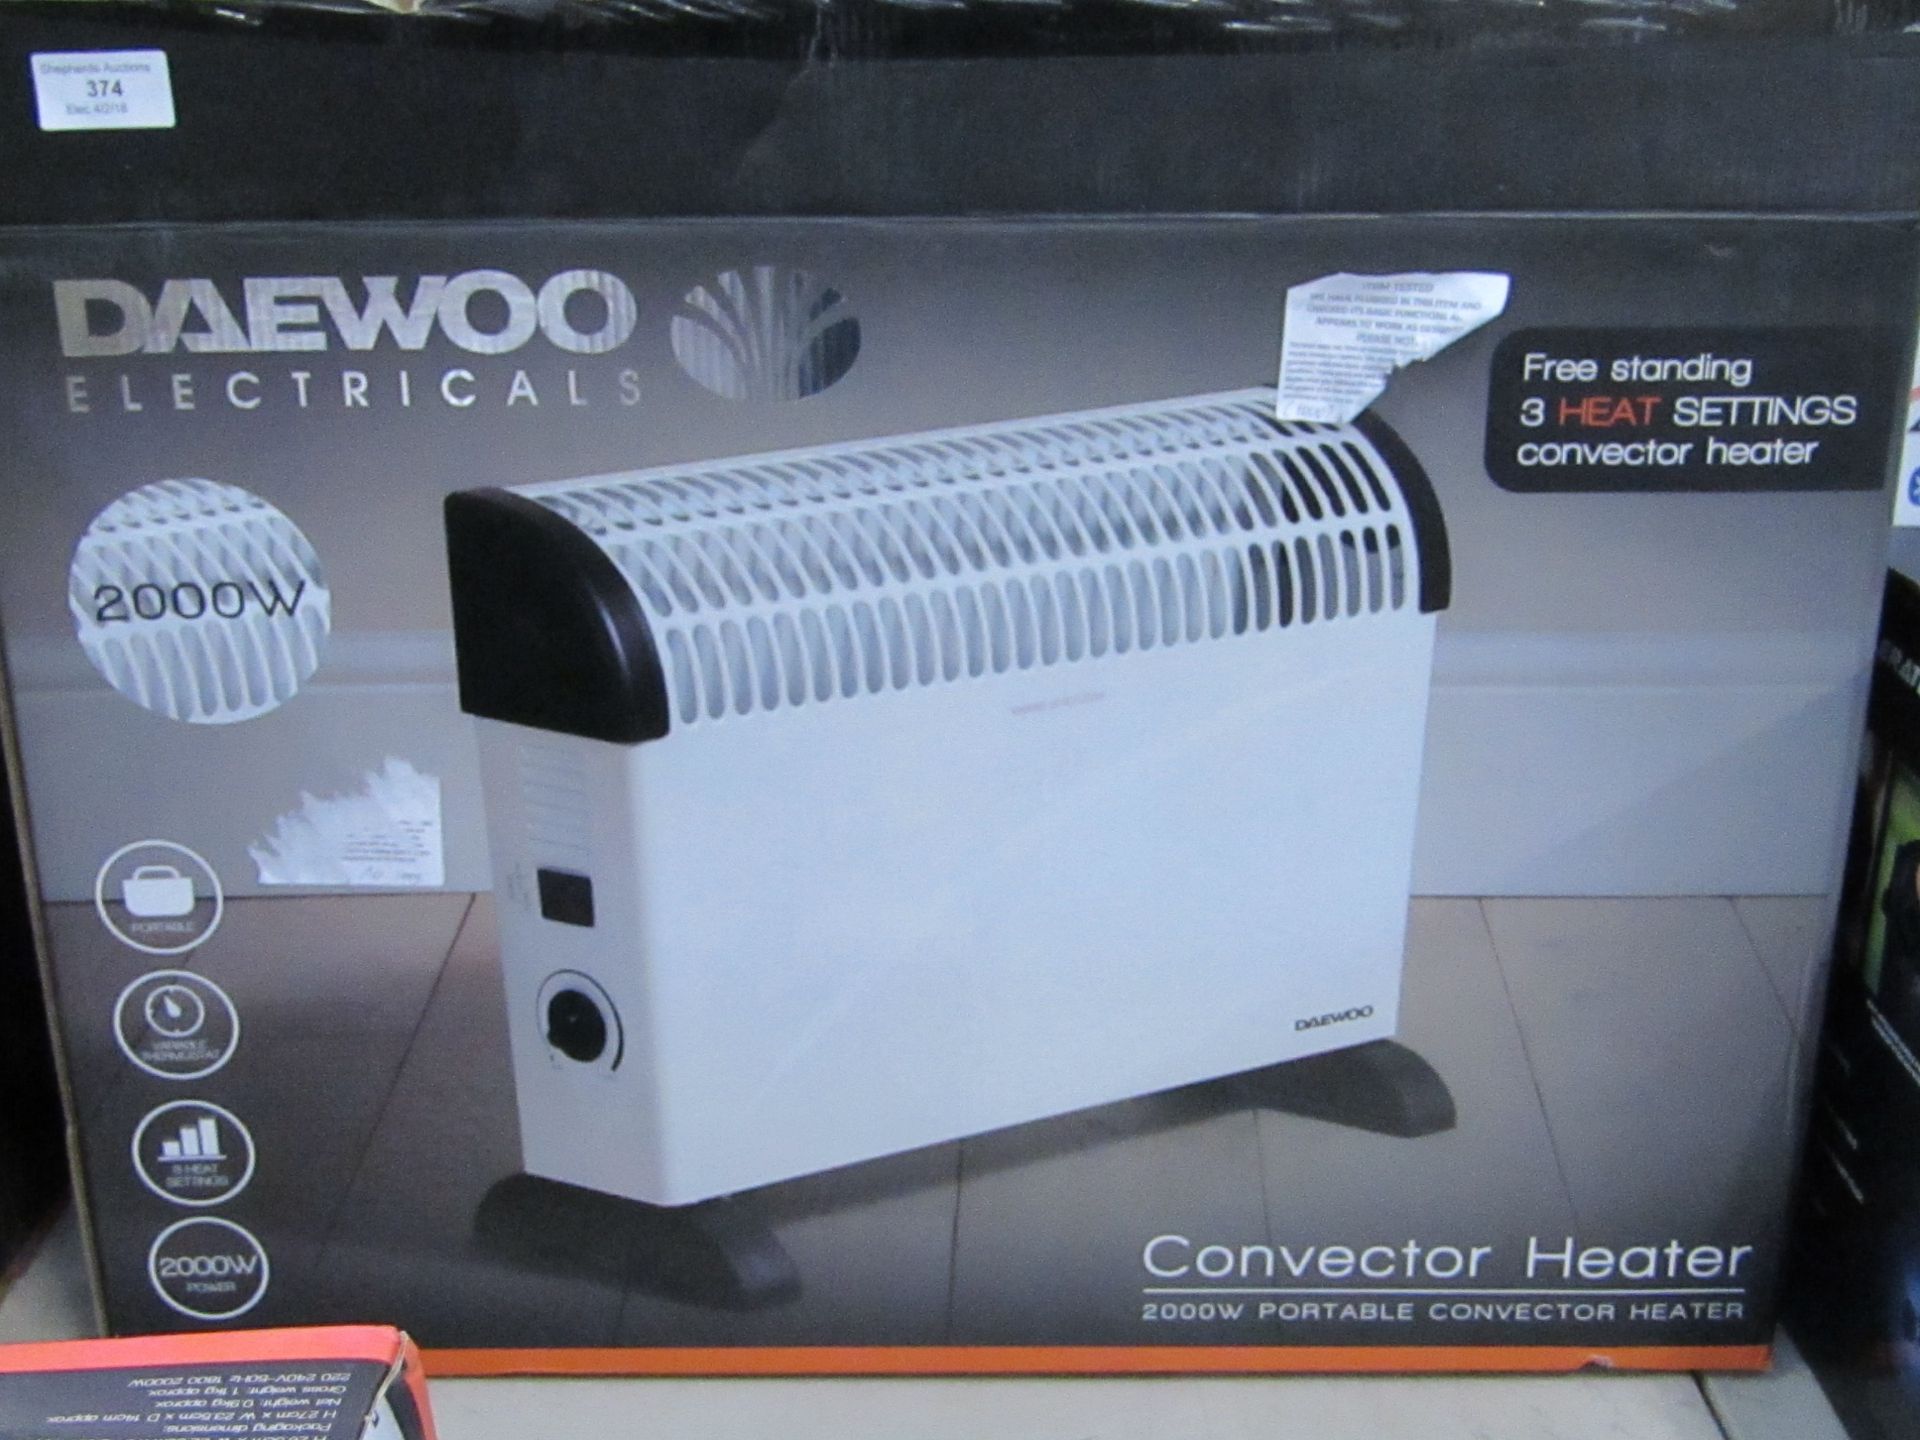 Daewoo Electricals free standing convector heater (no legs). Tested working & boxed.